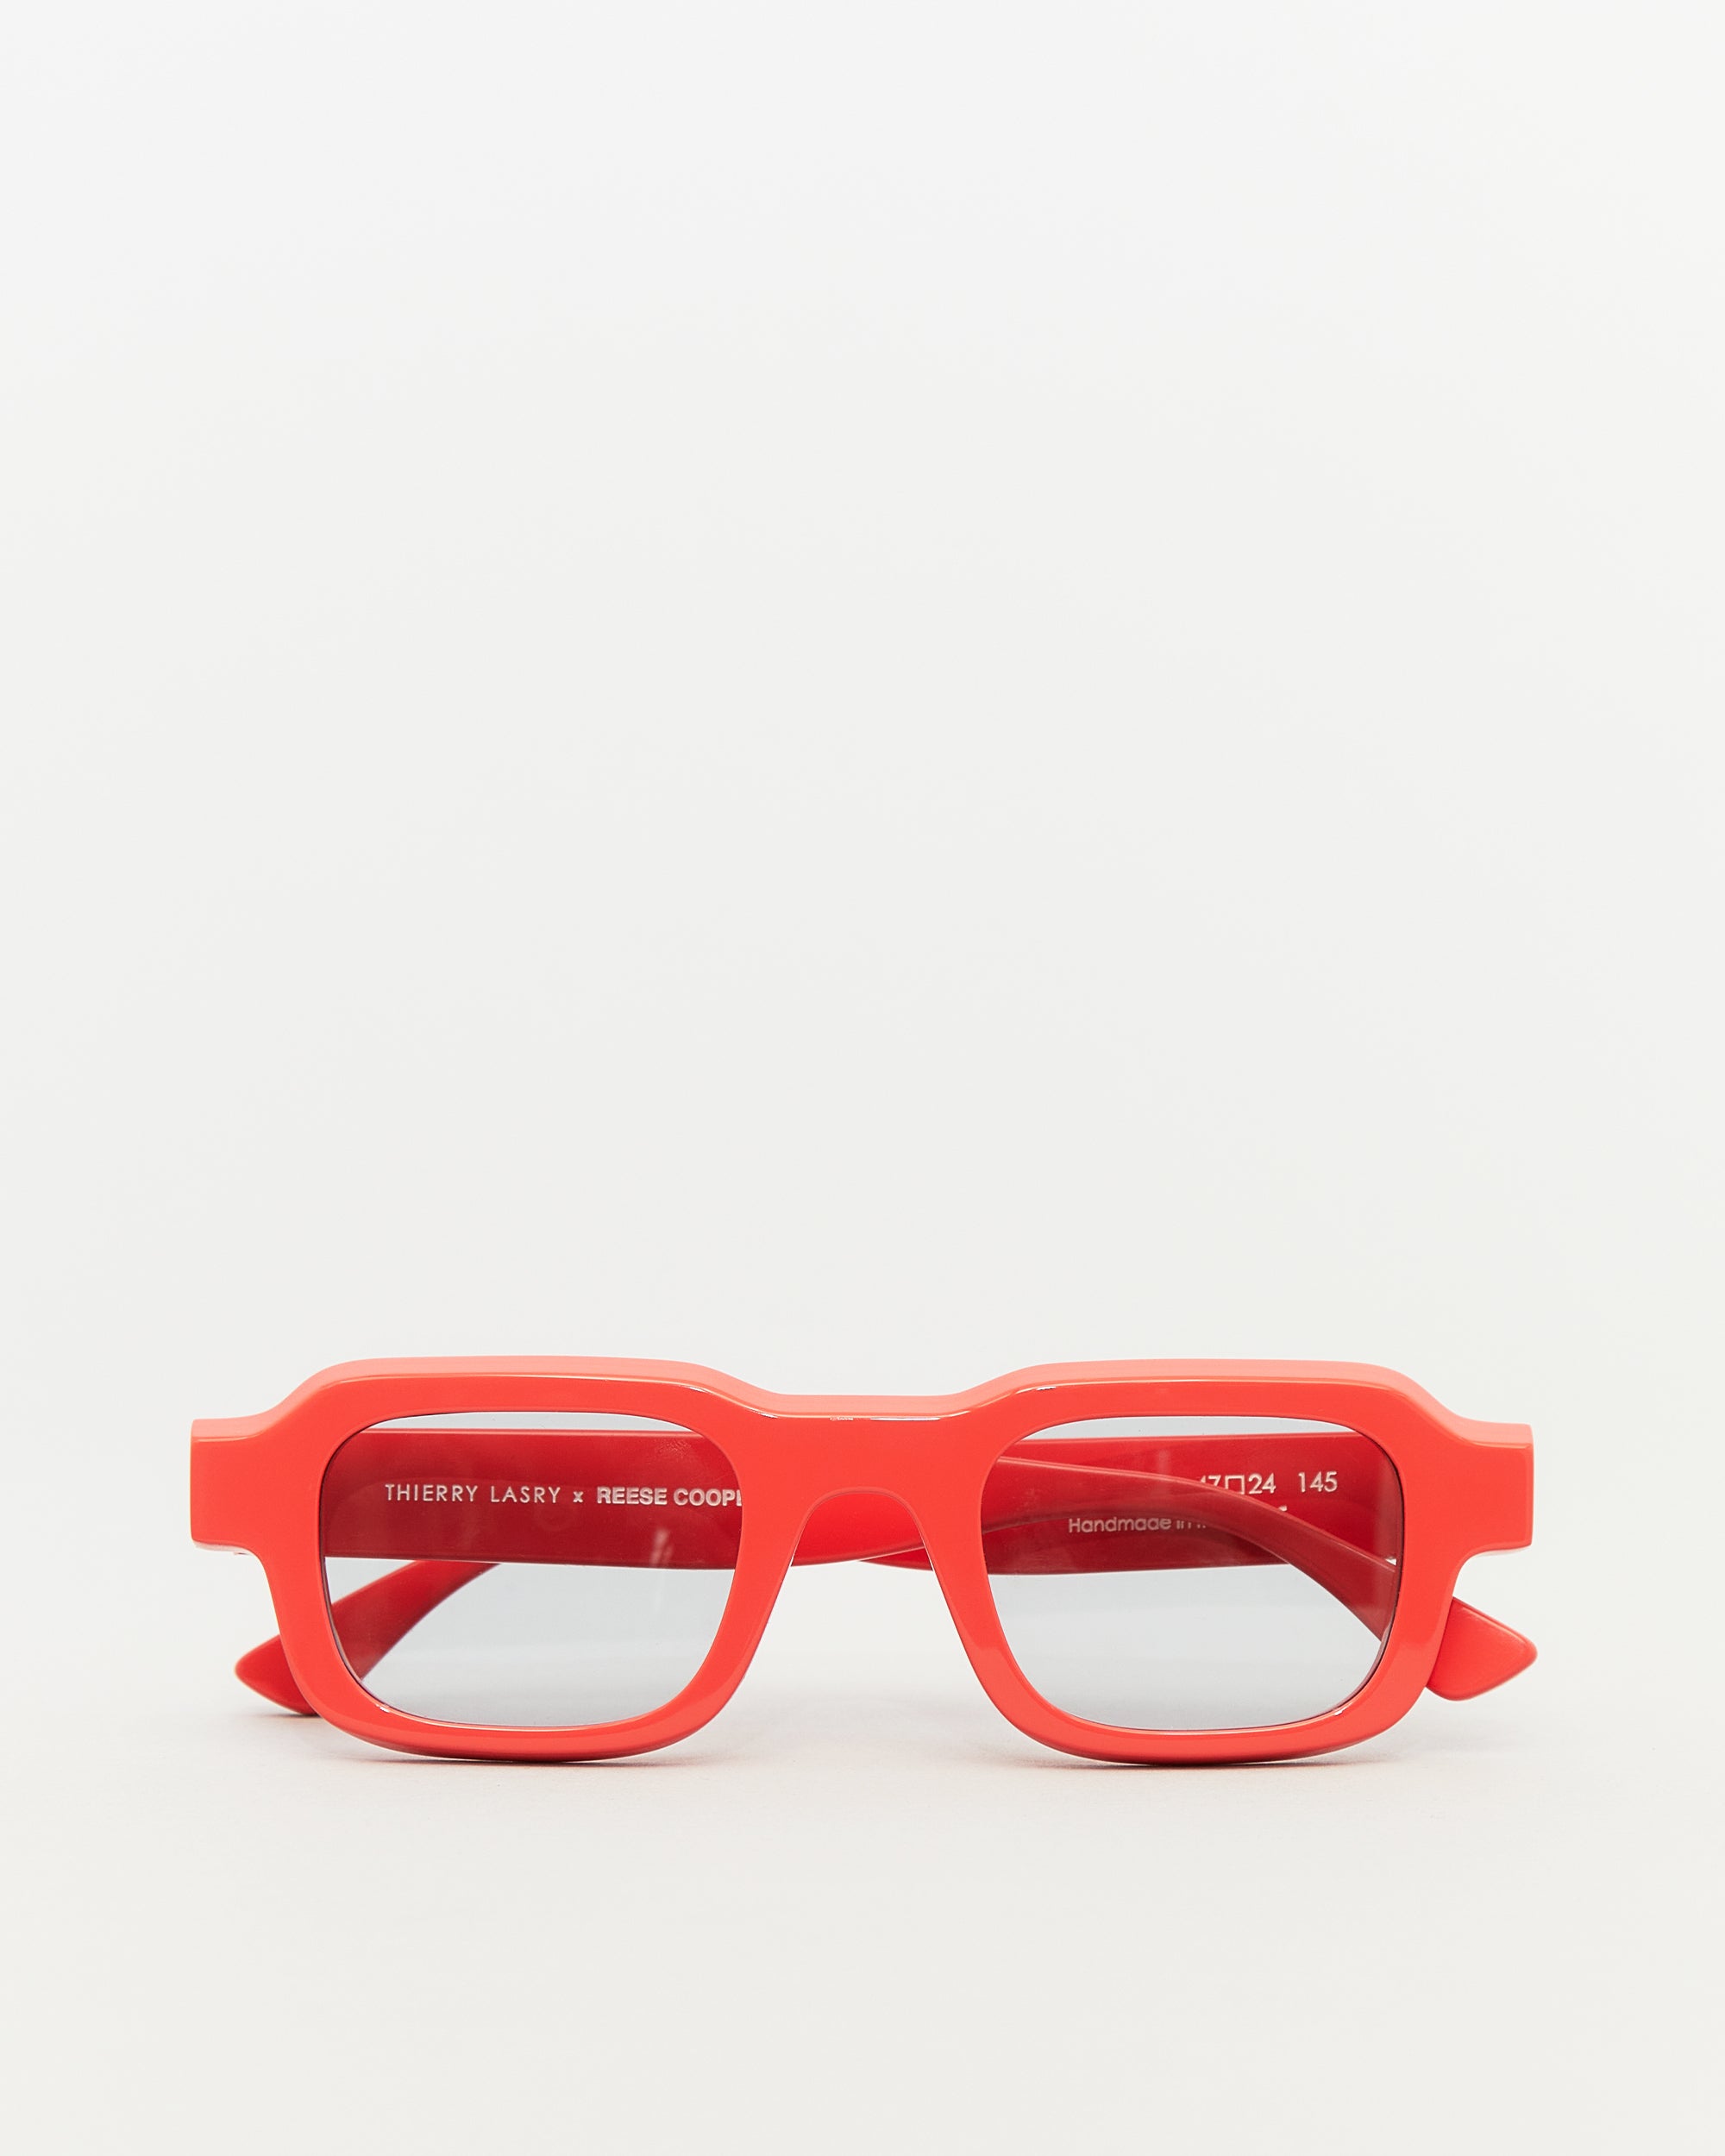 RC x Thierry Lasry Sunglasses in Red with Clear Lens